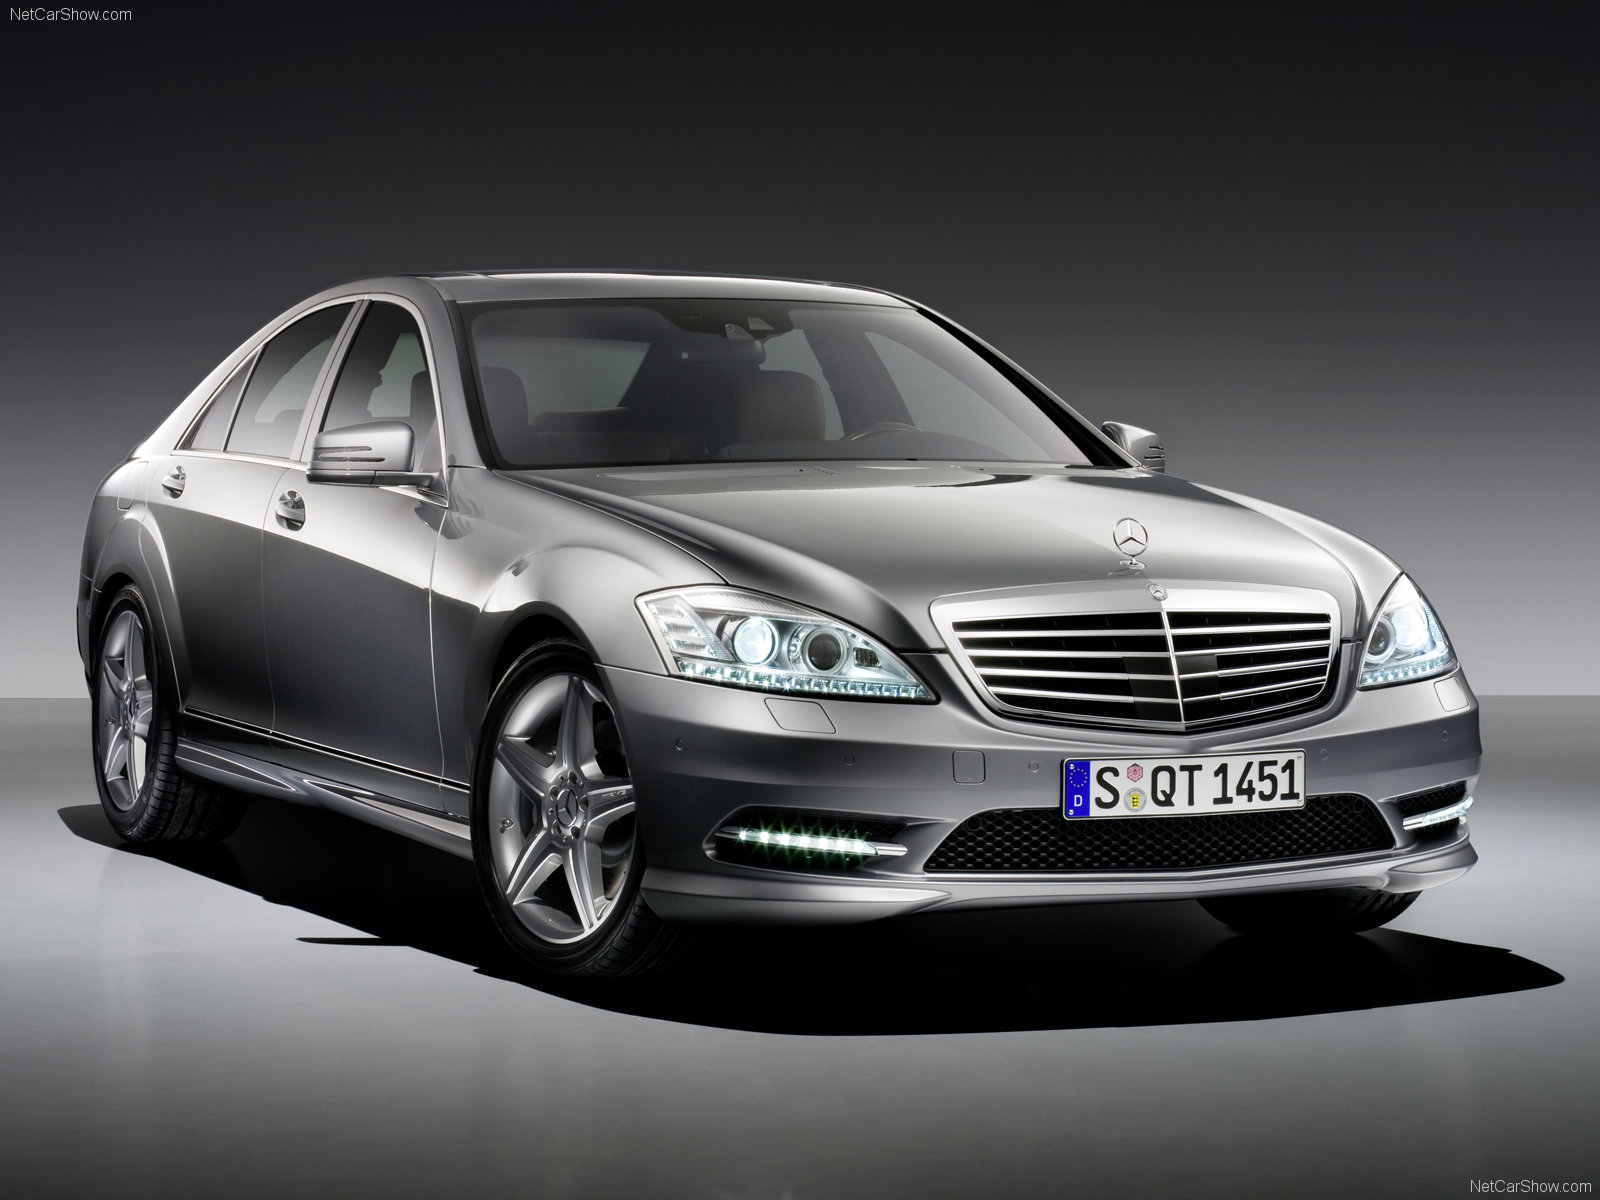 You can vote for this Mercedes-Benz S-Class photo